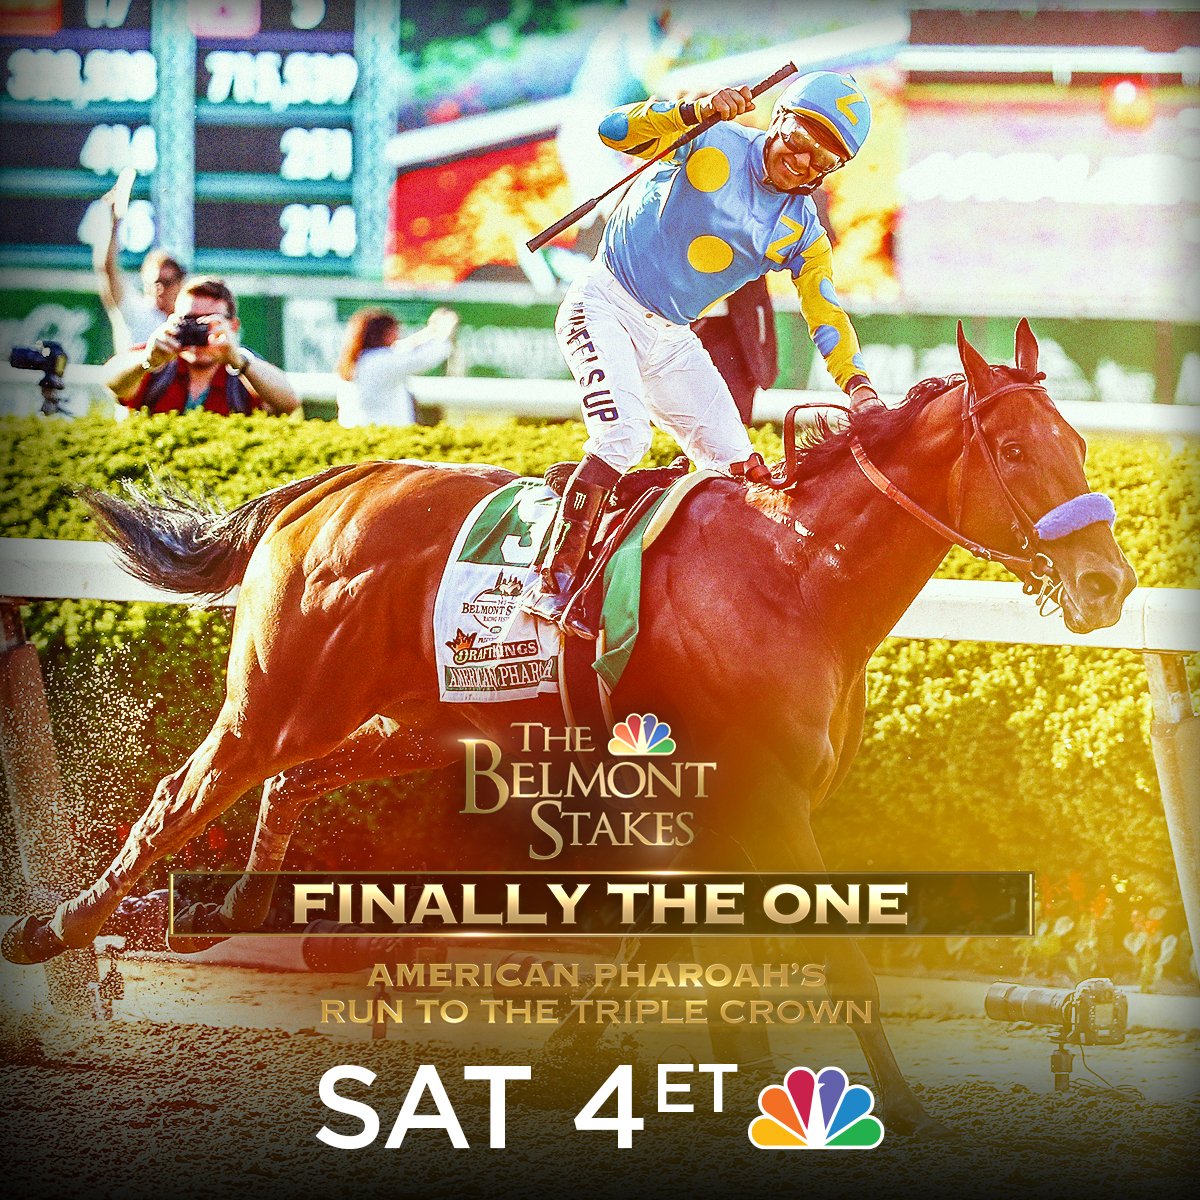 Tomorrow at 4pm ET, tune in as @NBCSports re-broadcasts its coverage of the 2015 Belmont Stakes, won by American Pharoah to clinch his Triple Crown sweep.